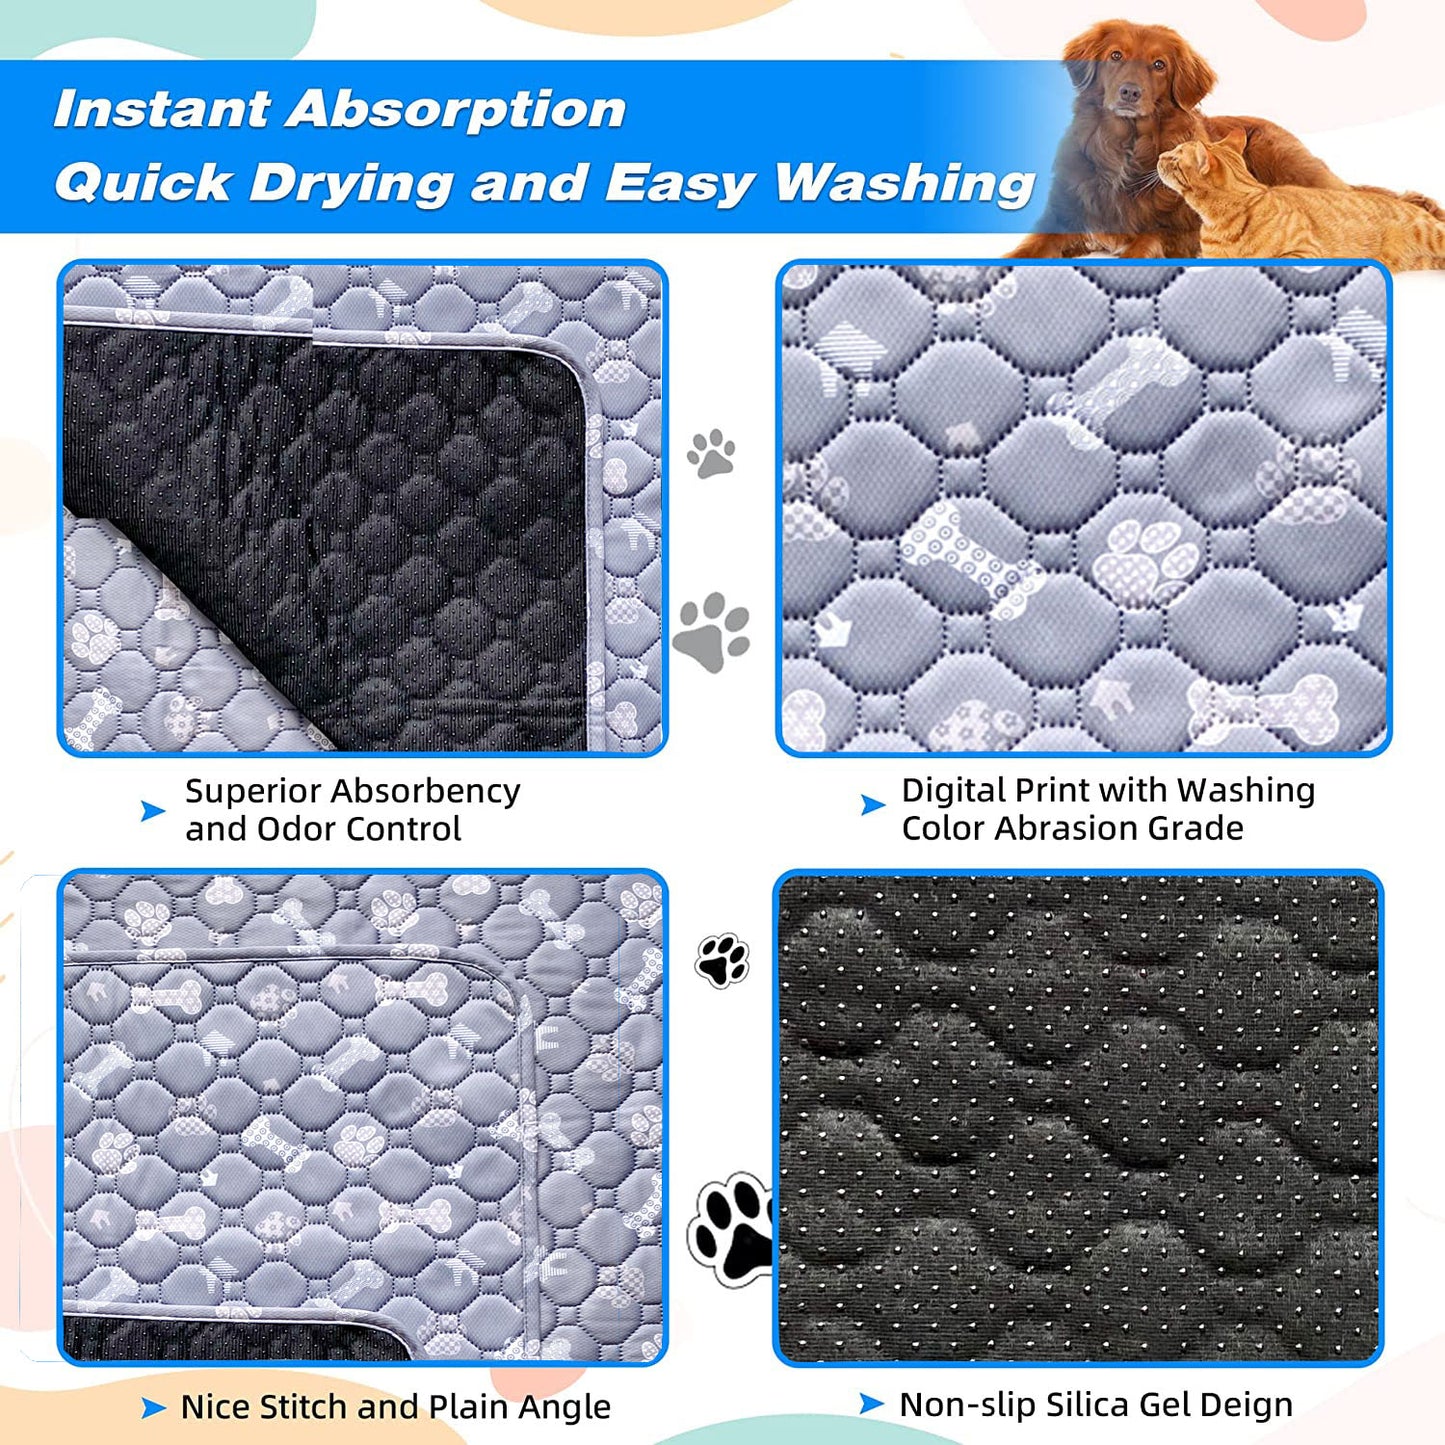 4 Layer Washable Dog Pee Pad, Pet Cat Training Pads, Reusable Puppy Whelping Pads,Protective Non-slip Blanket Mats for dog fences cage doghouse, Couch Cover, Potty training